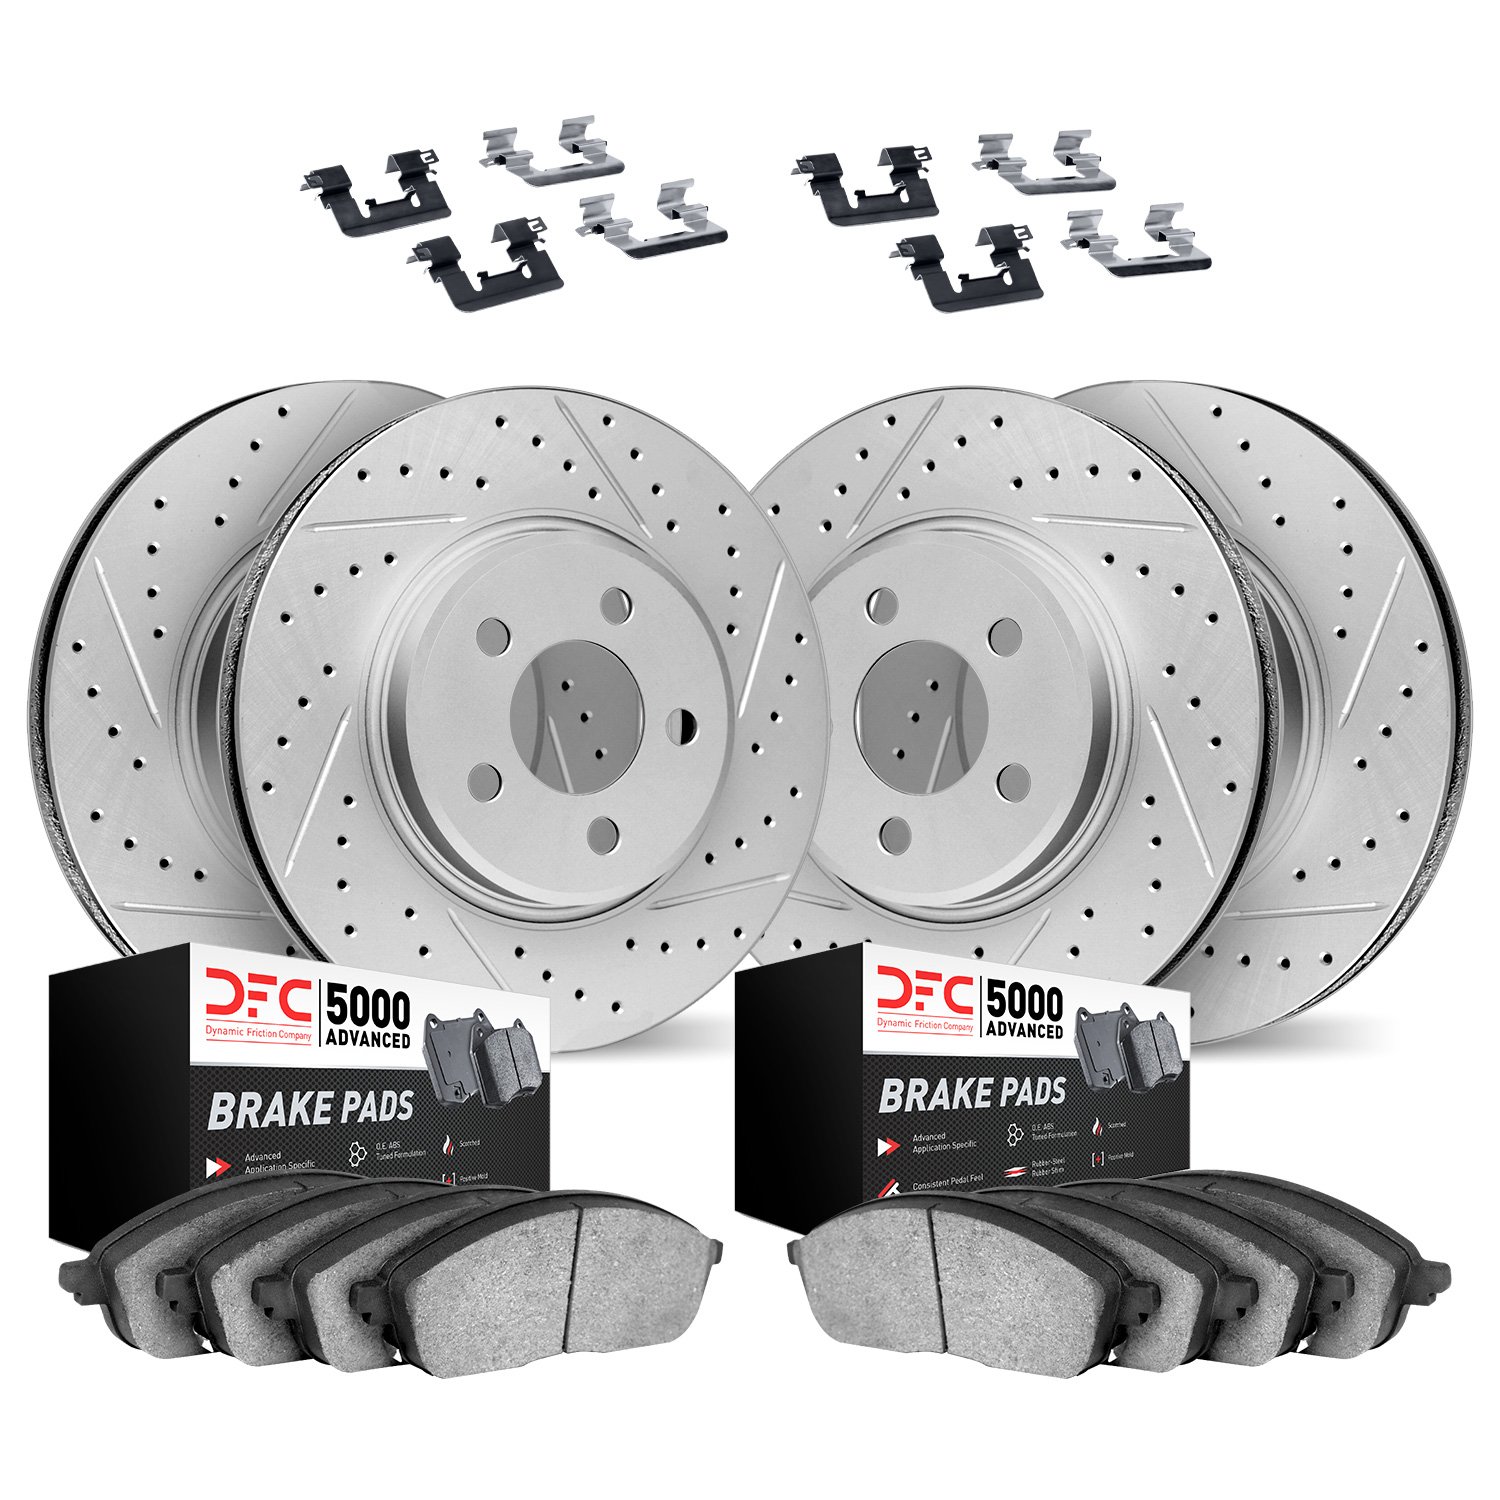 2514-11003 Geoperformance Drilled/Slotted Rotors w/5000 Advanced Brake Pads Kit & Hardware, 2010-2013 Land Rover, Position: Fron